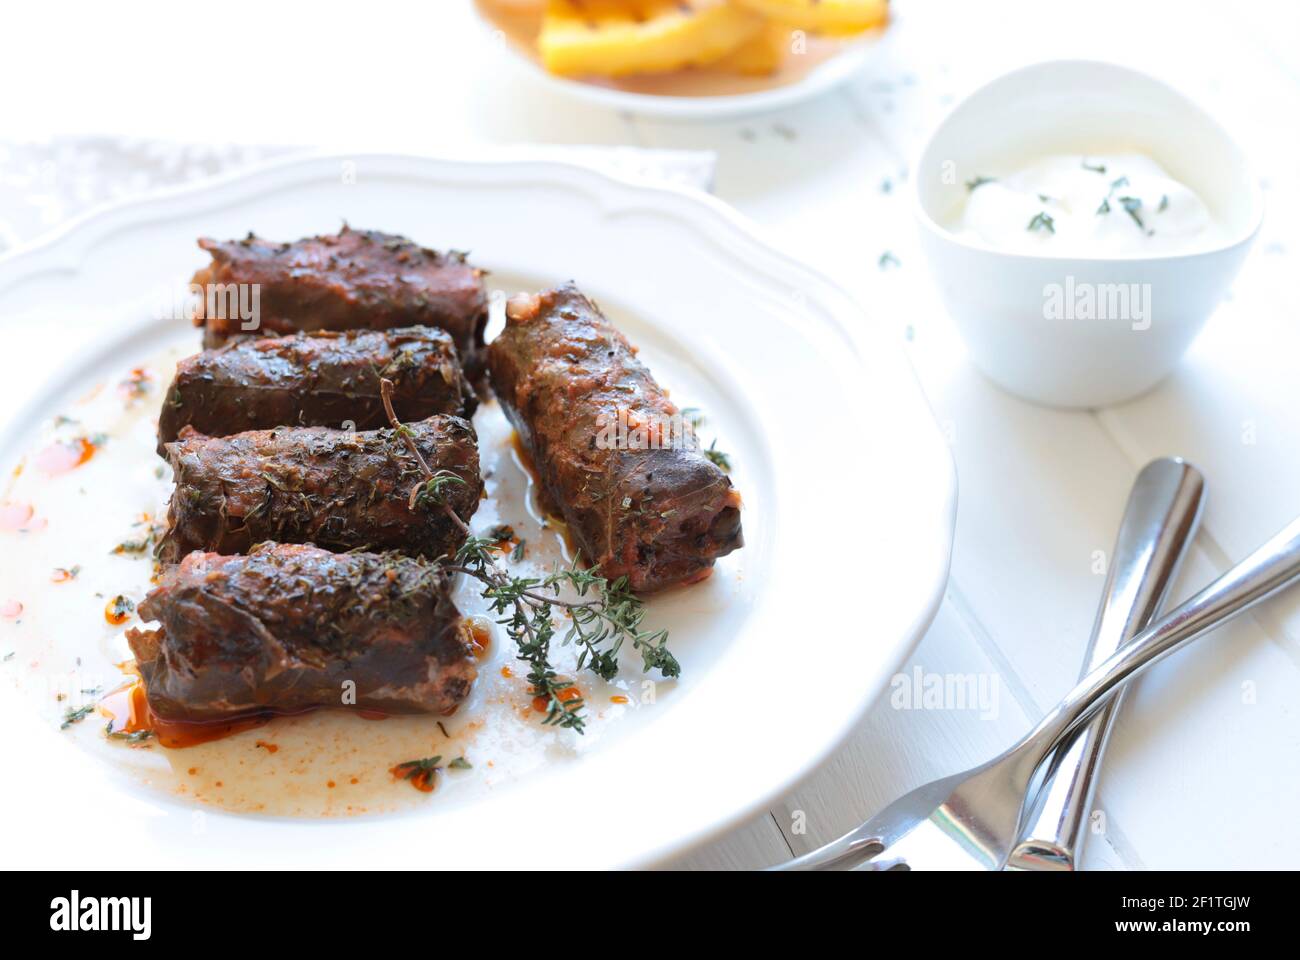 Romanian food. Stuffed Grape Leaves known as Sarmalute in foi de vita on white background. High angle view. Stock Photo